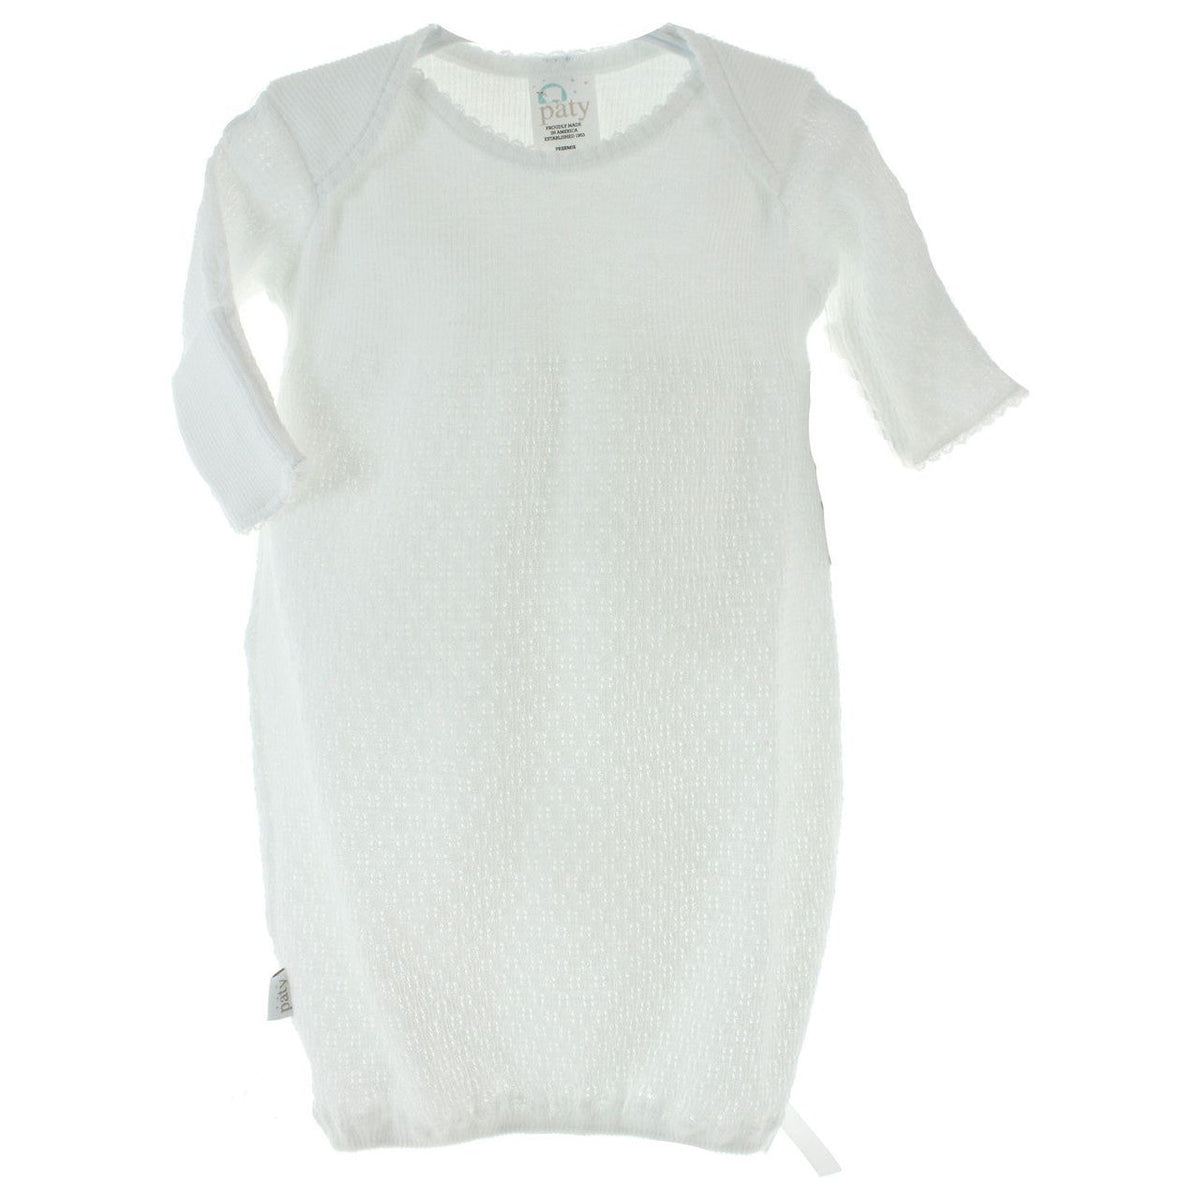 Newborn Unisex Take Home Outfit